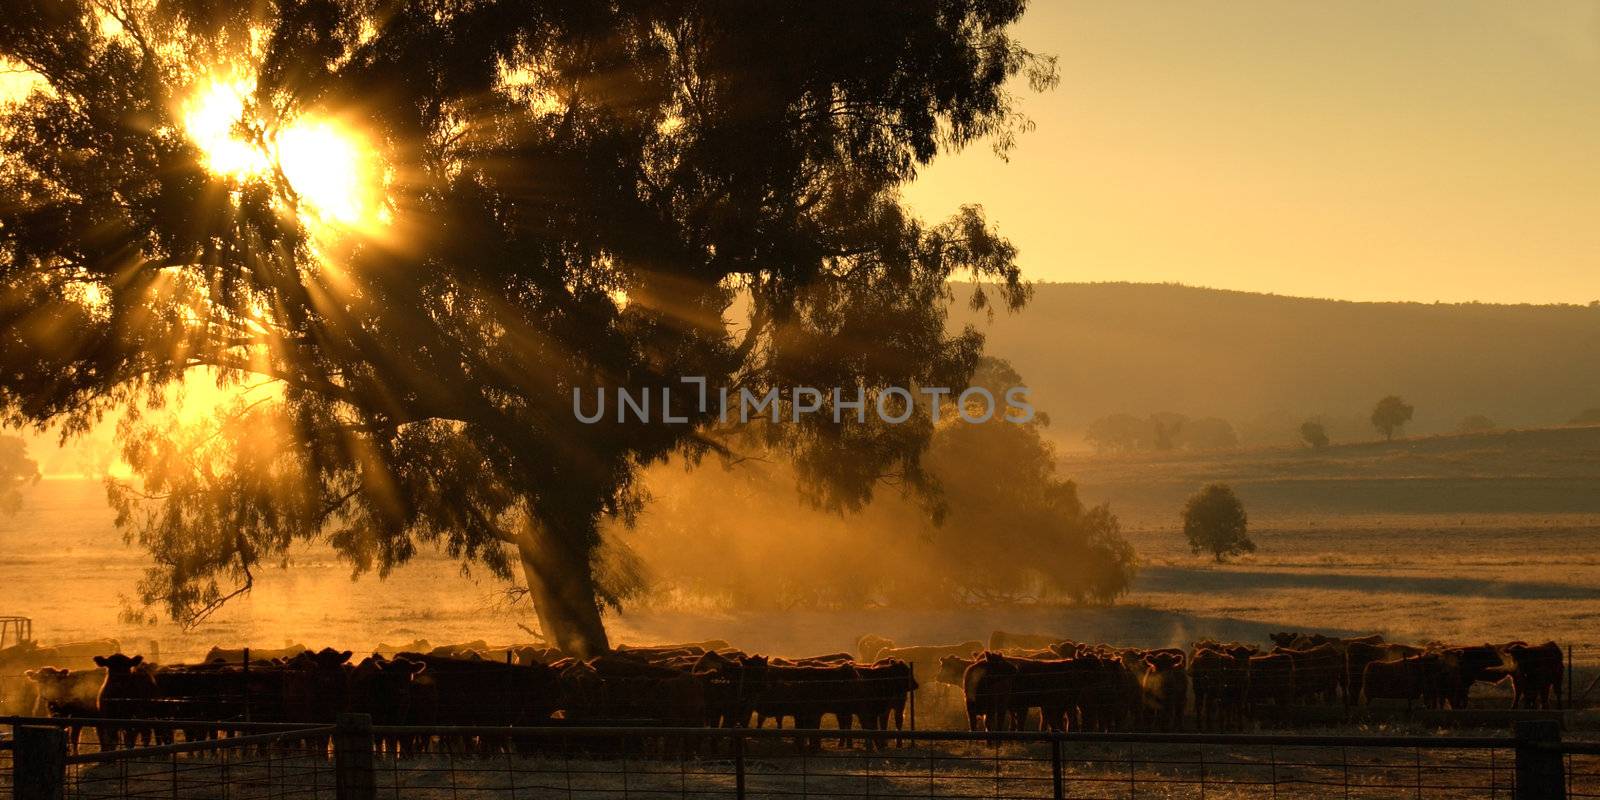 sun rays coming through the trees over a herd of cattle in the morning